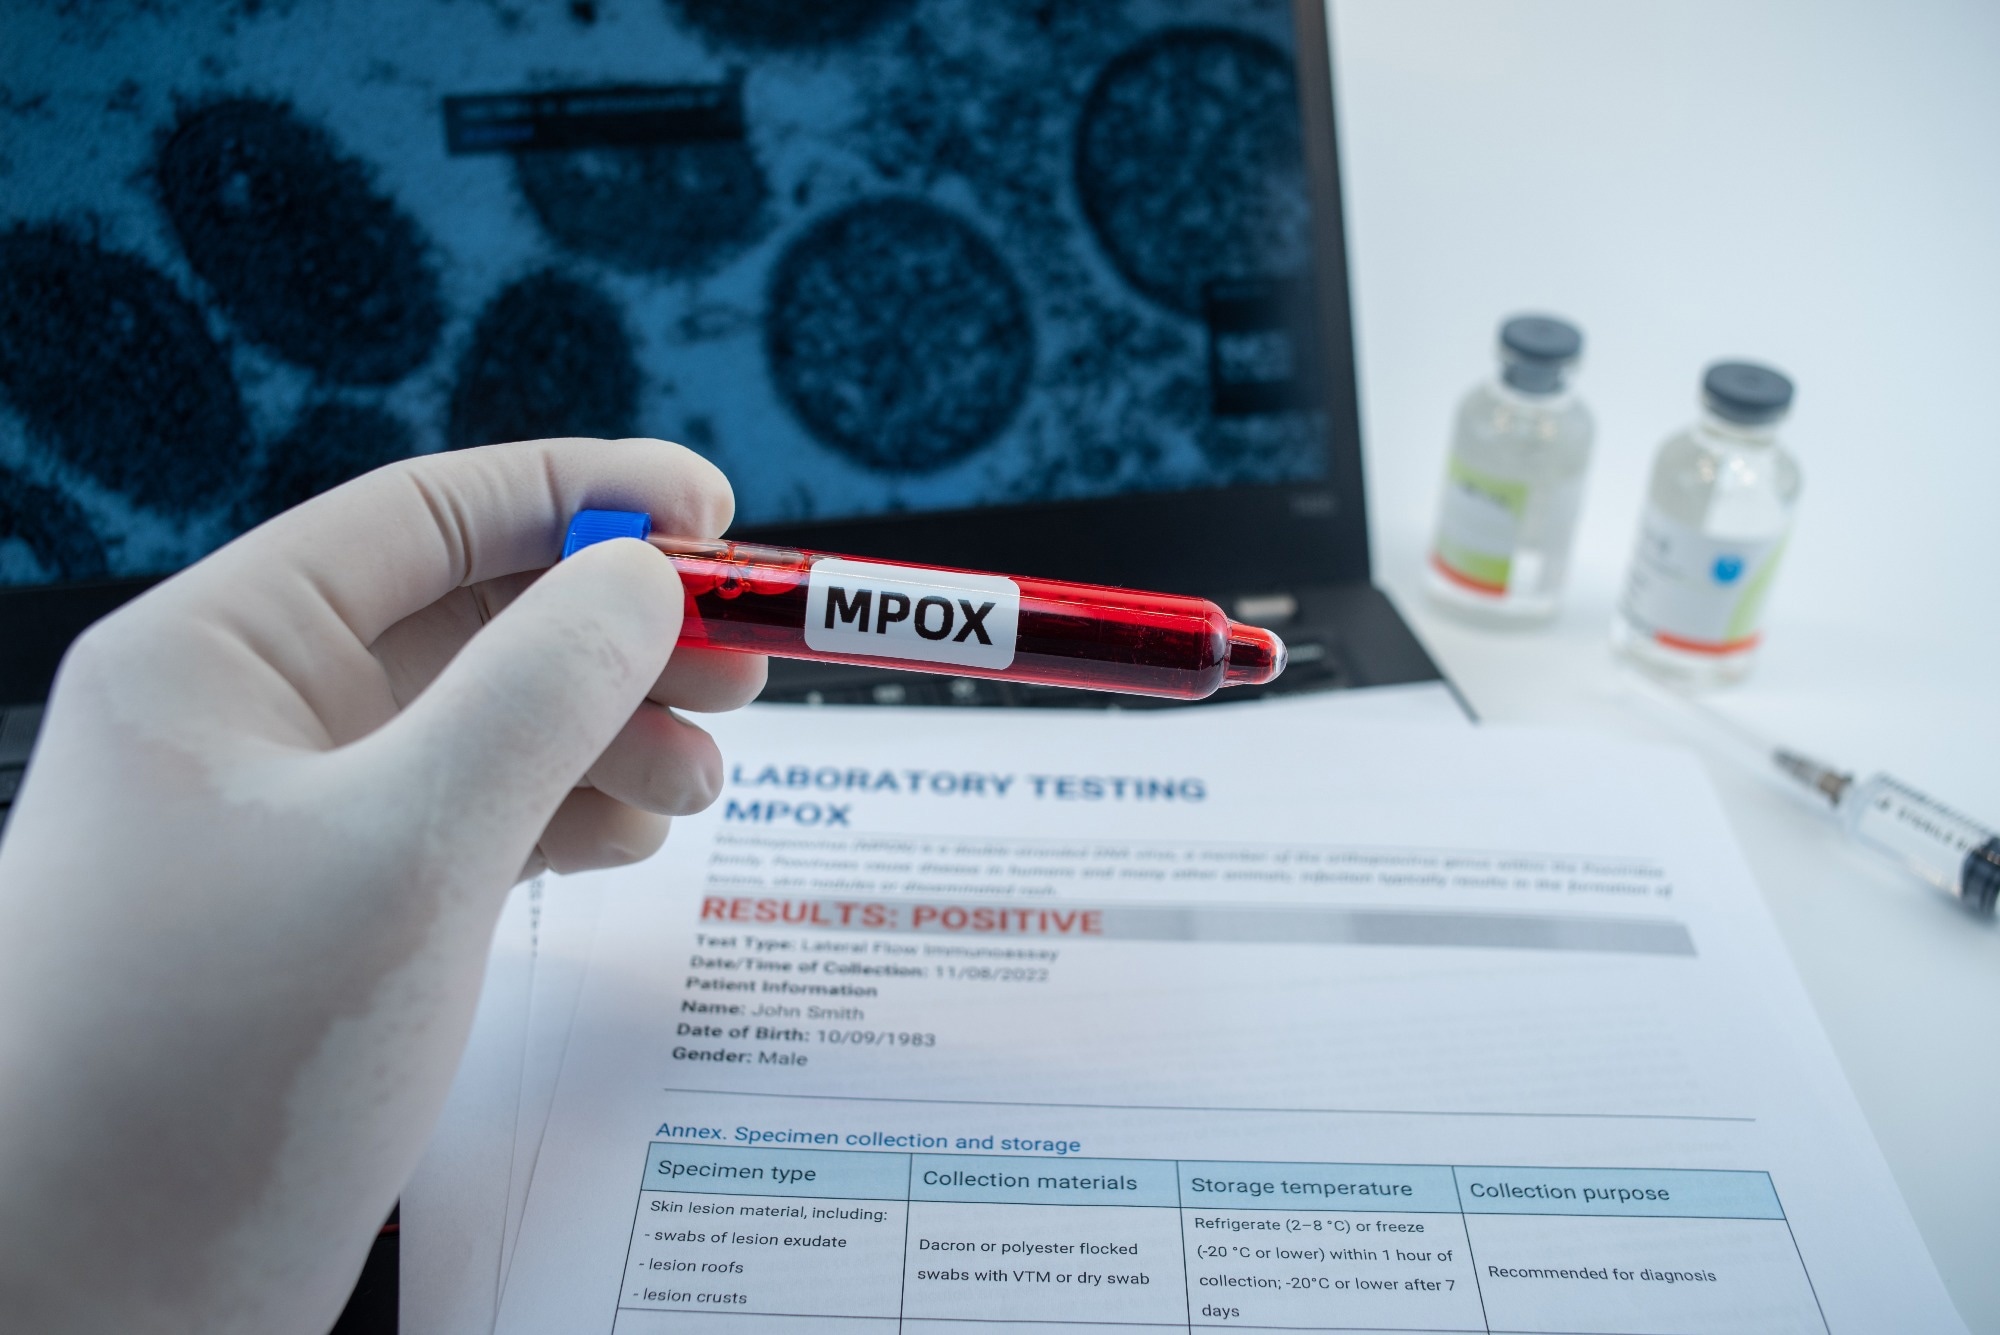 Study: Mpox respiratory transmission: the state of the evidence. Image Credit: QINQIE99/Shutterstock